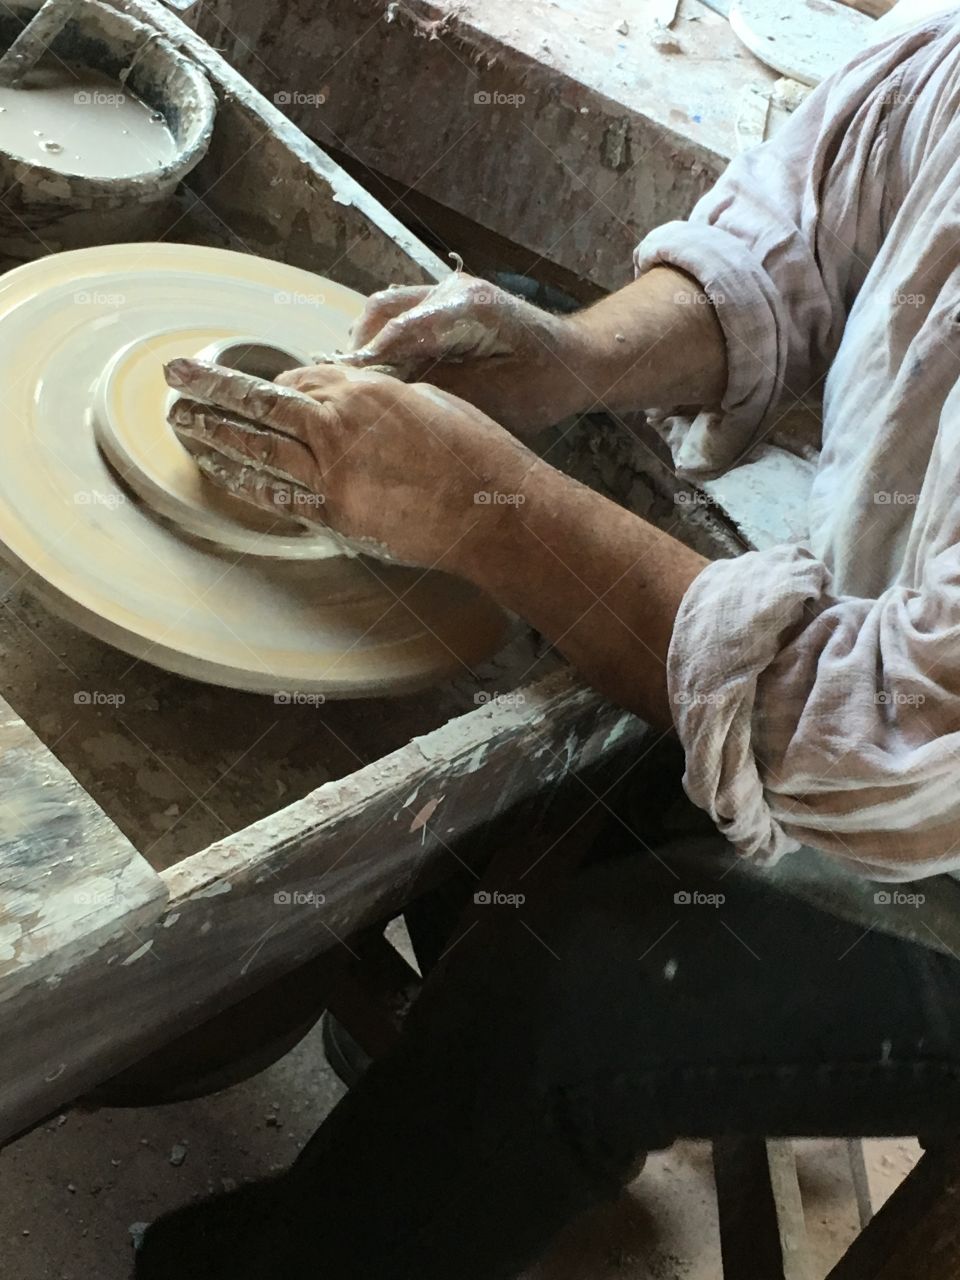 A Potter Working His Craft